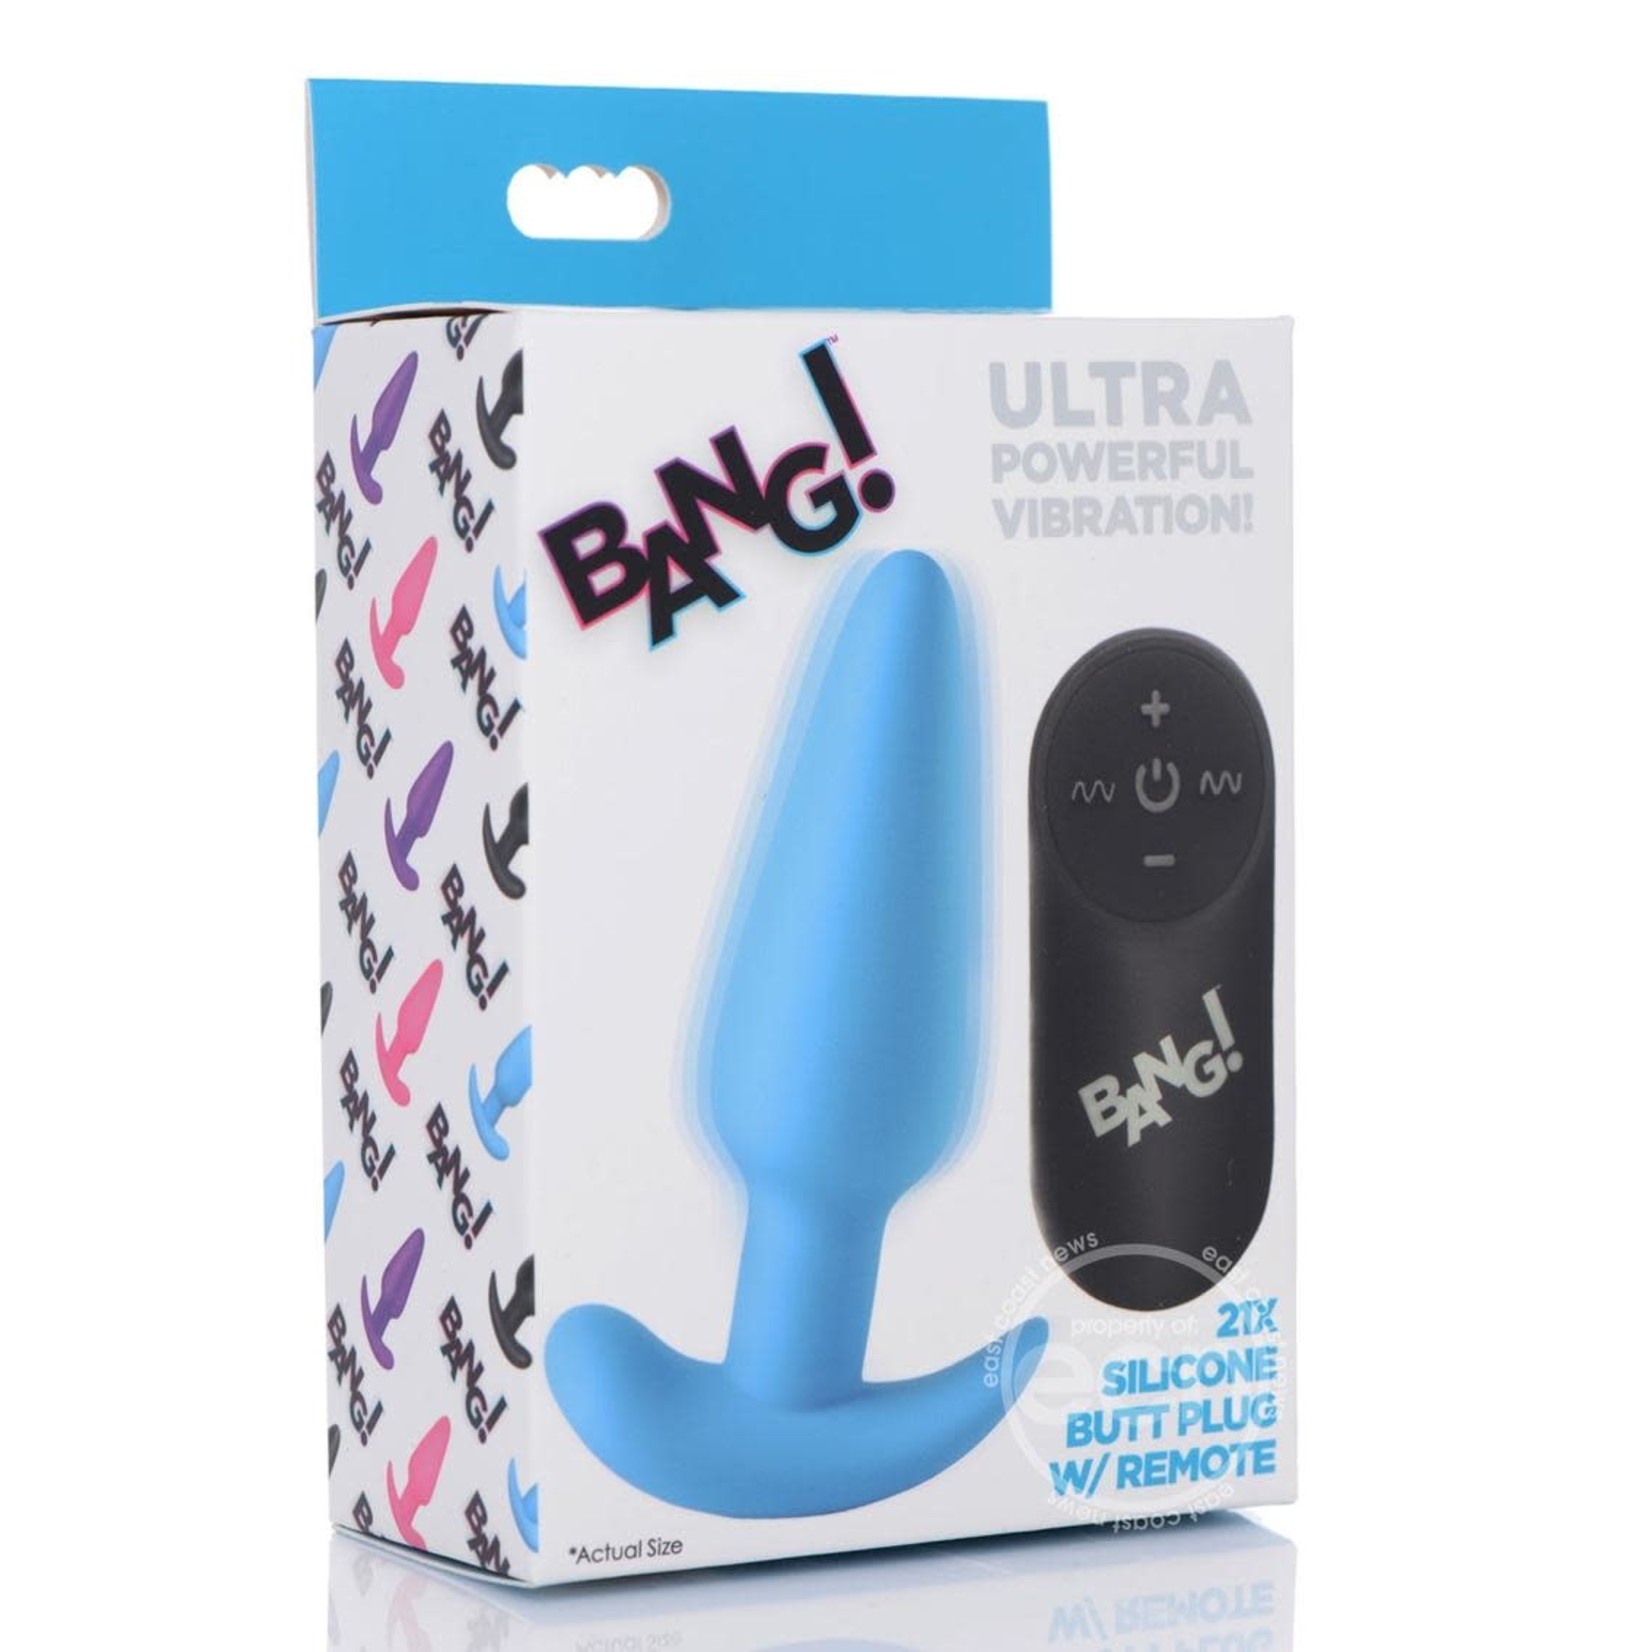 Bang! 21x Vibrating Silicone Rechargeable Butt Plug with Remote Control - Blue